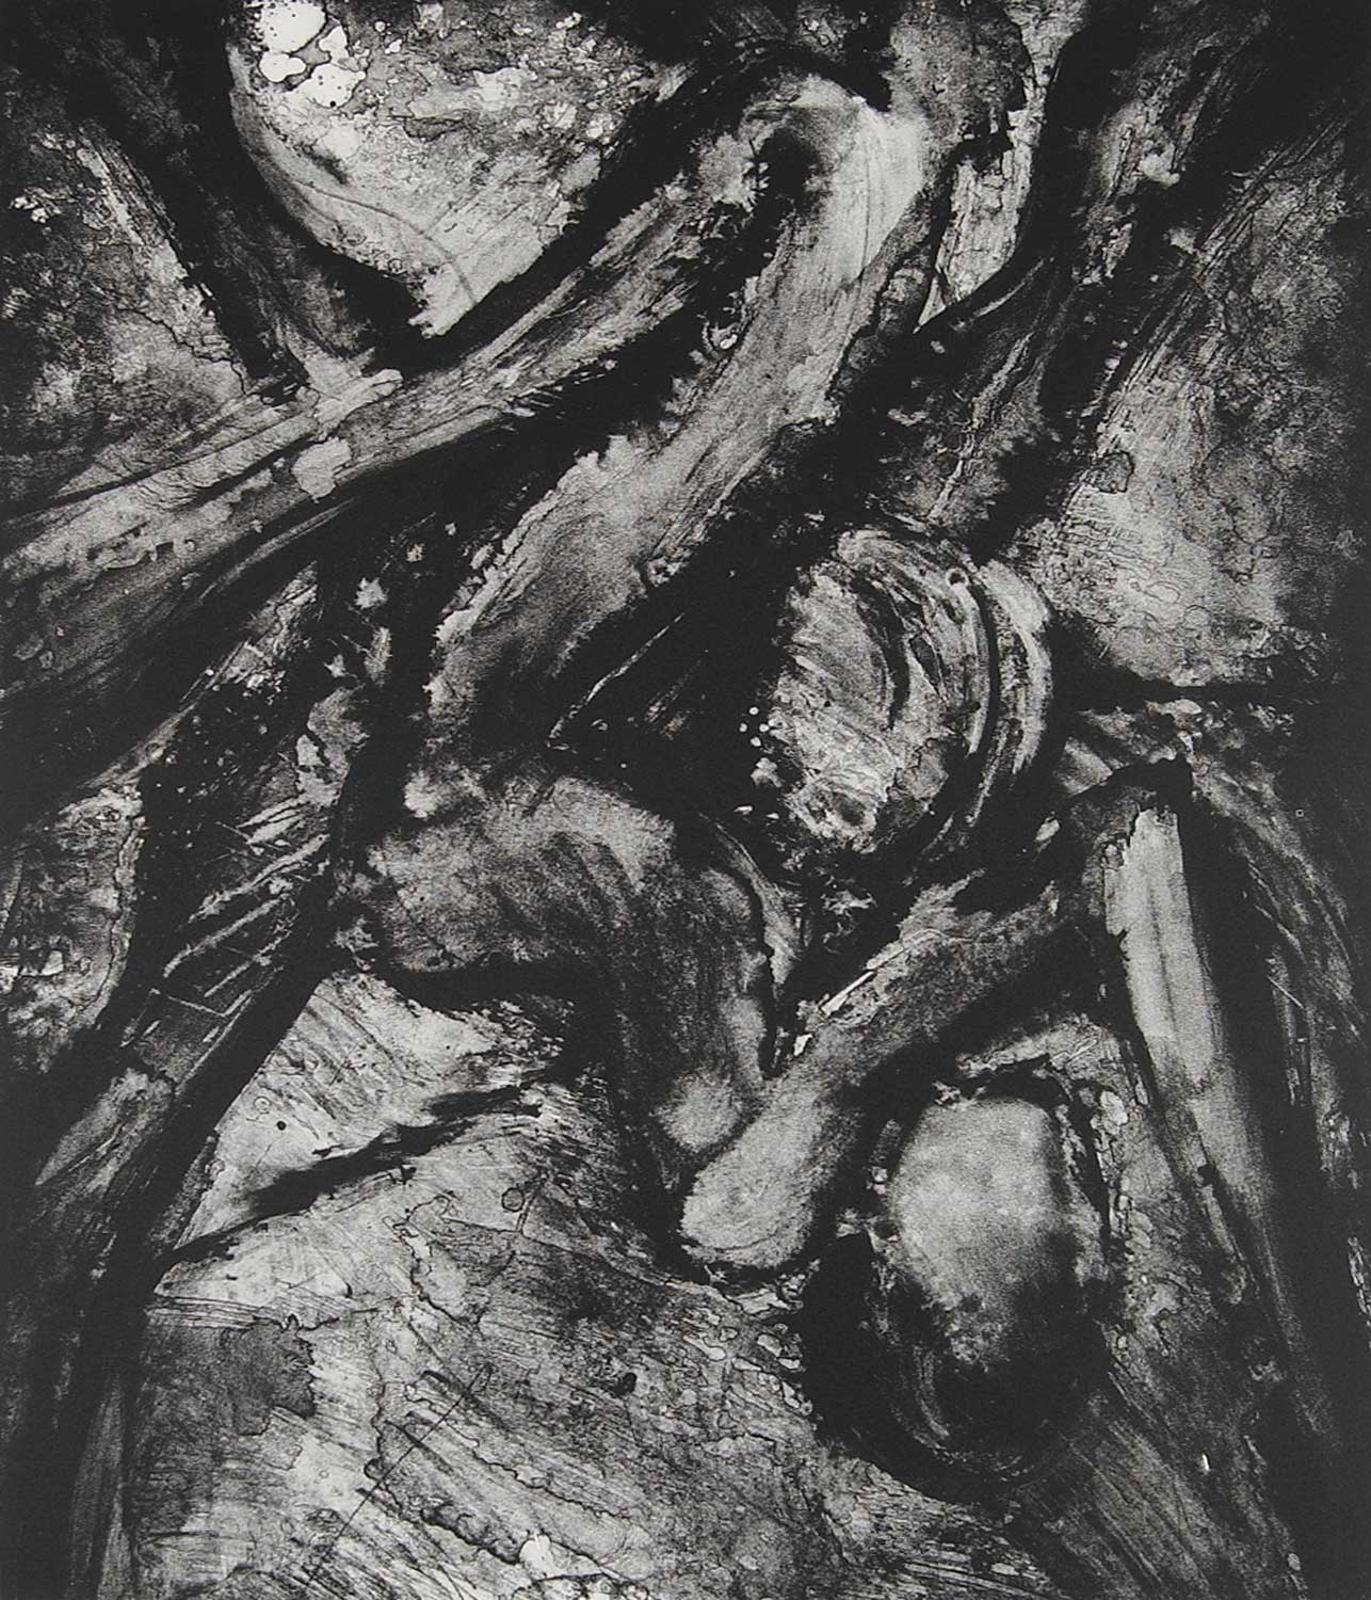 John Graham Coughtry (1931-1999) - Untitled - Black and White Abstraction I #26/28